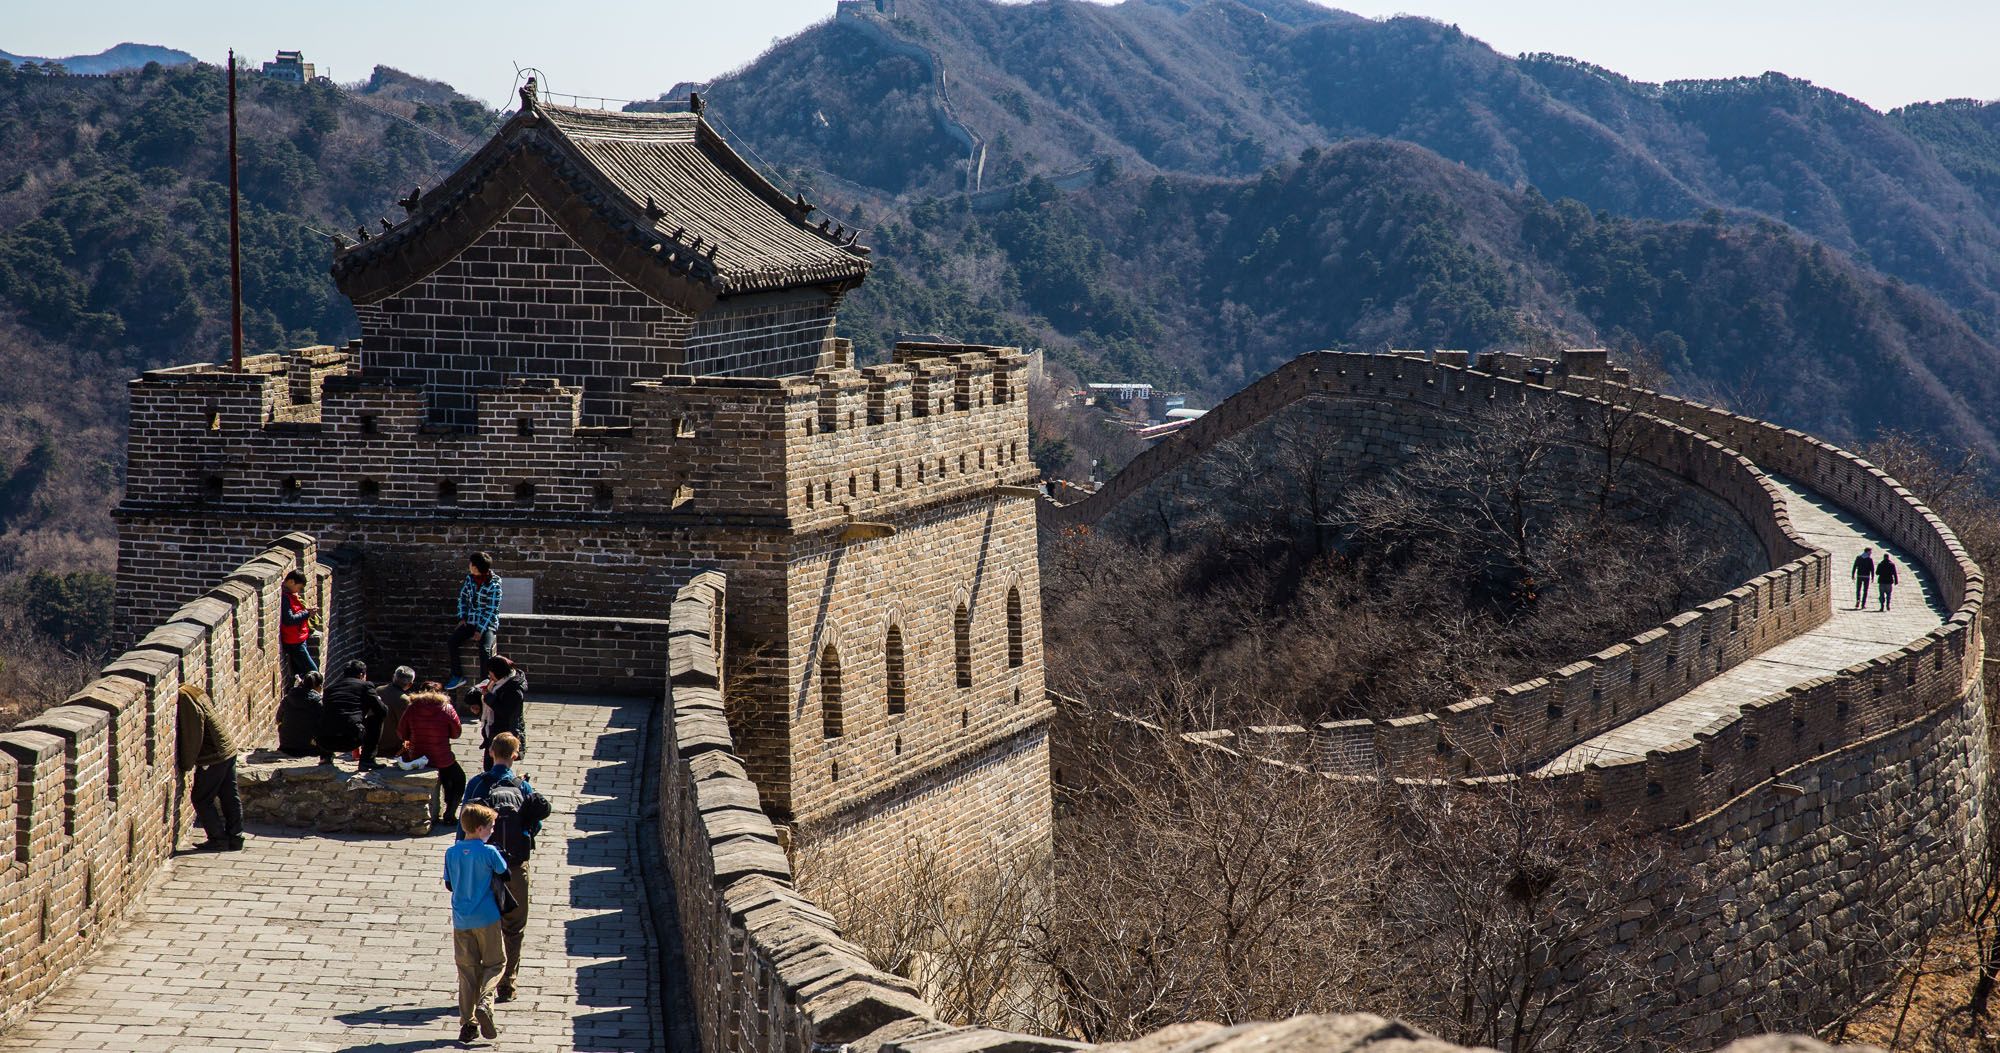 Featured image for “Walking on the Great Wall of China”